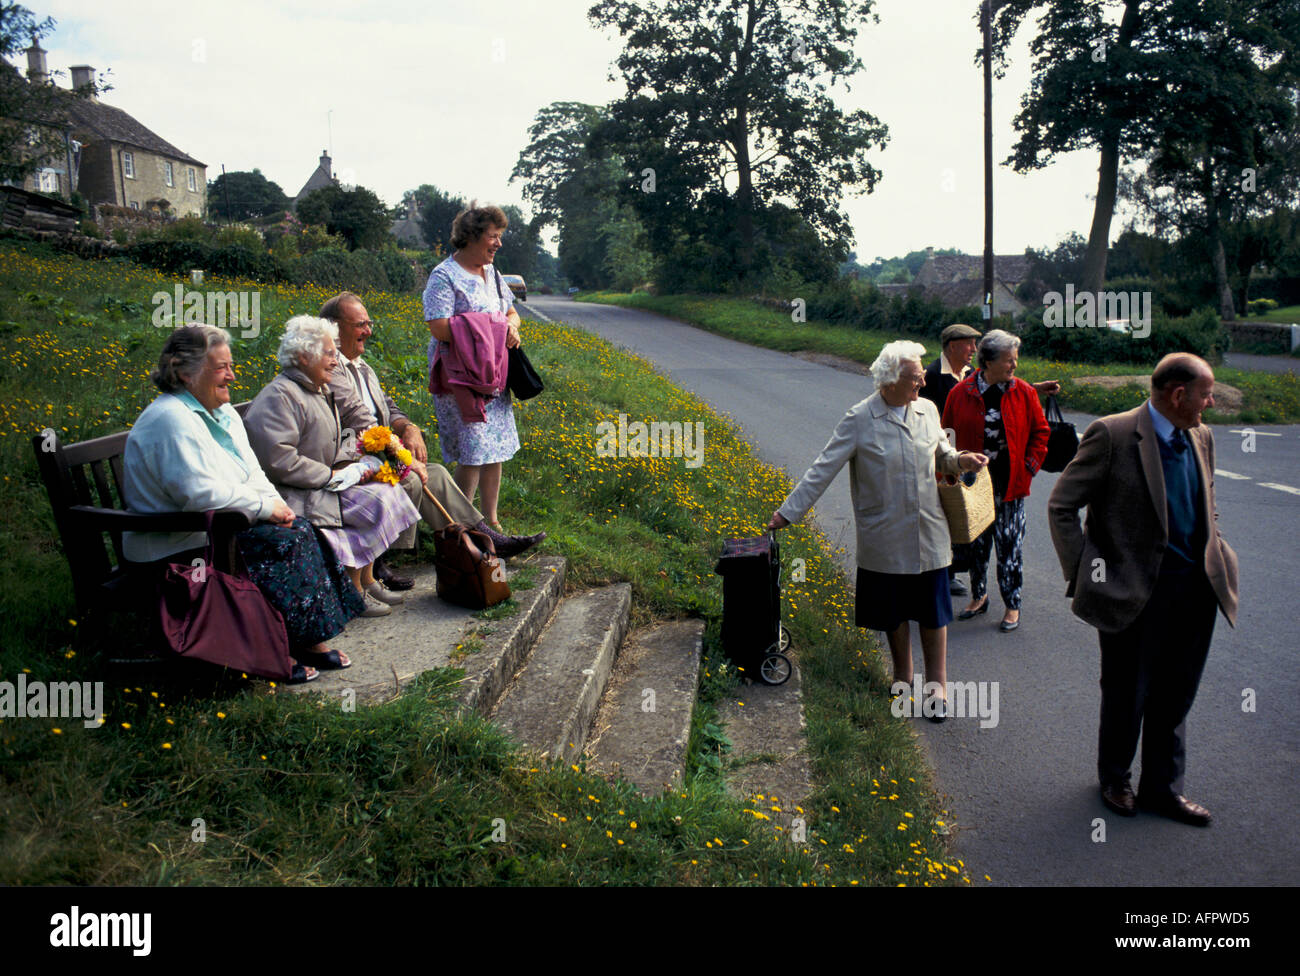 Village people wait at for a rural bus to arrive. Eastleach Turville Gloucestershire England. 1990s 1993 HOMER SYKES Stock Photo